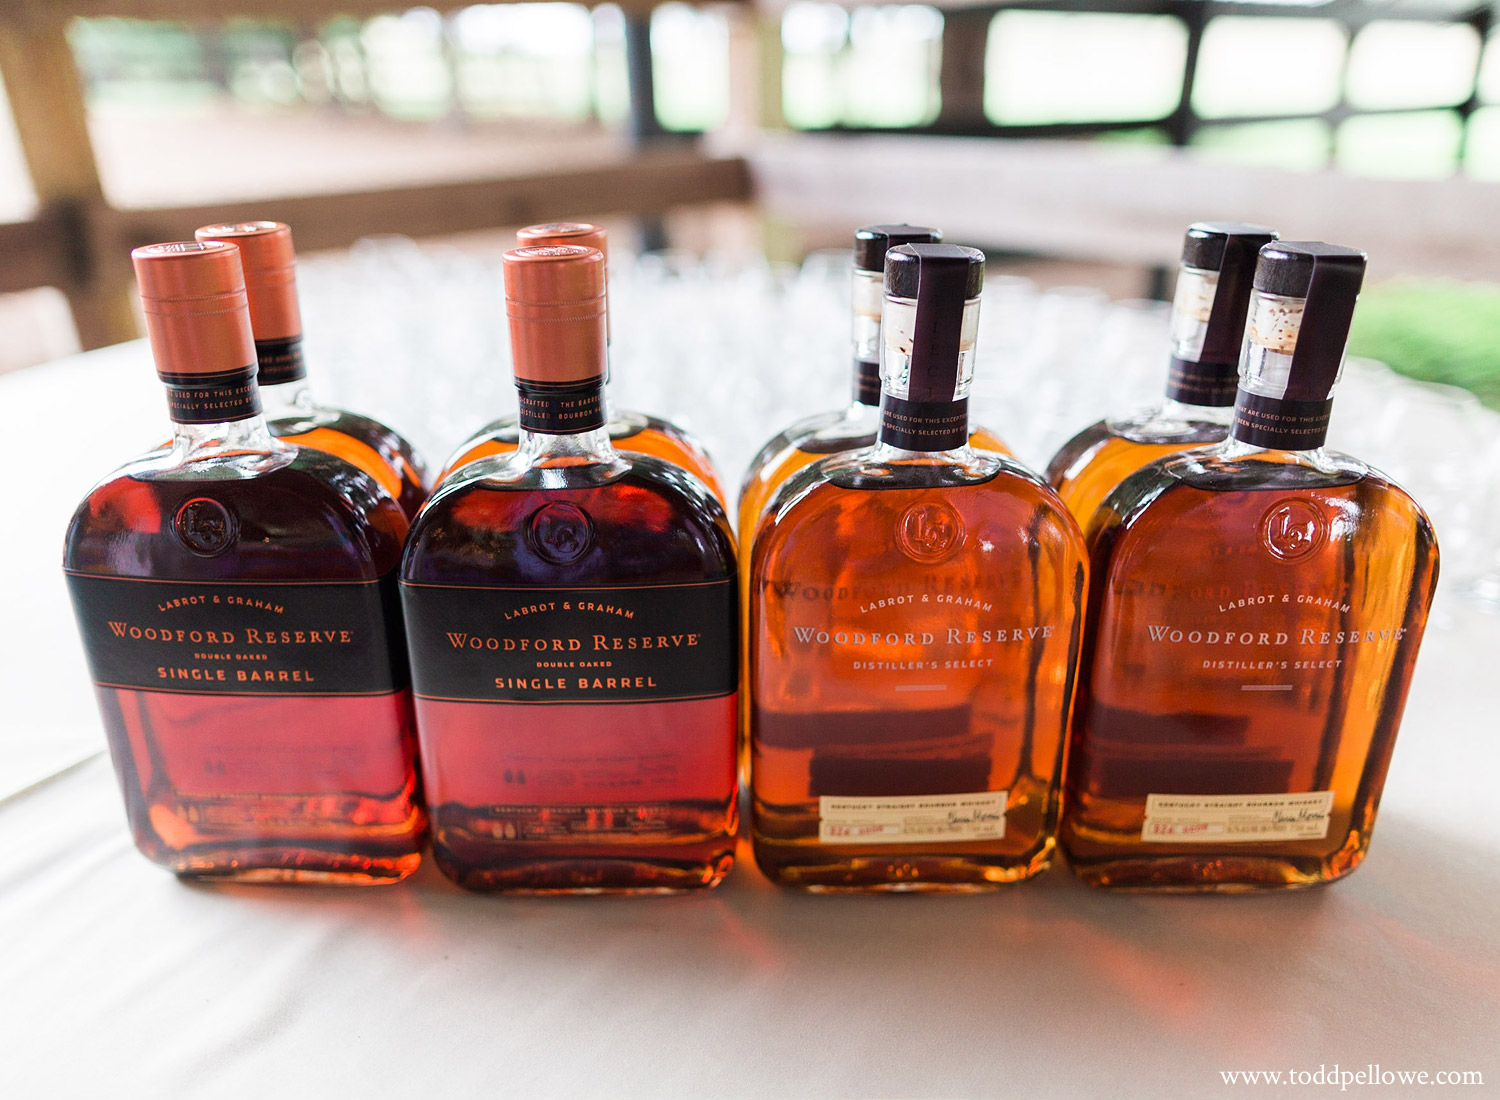 Woodford Reserve Photographer